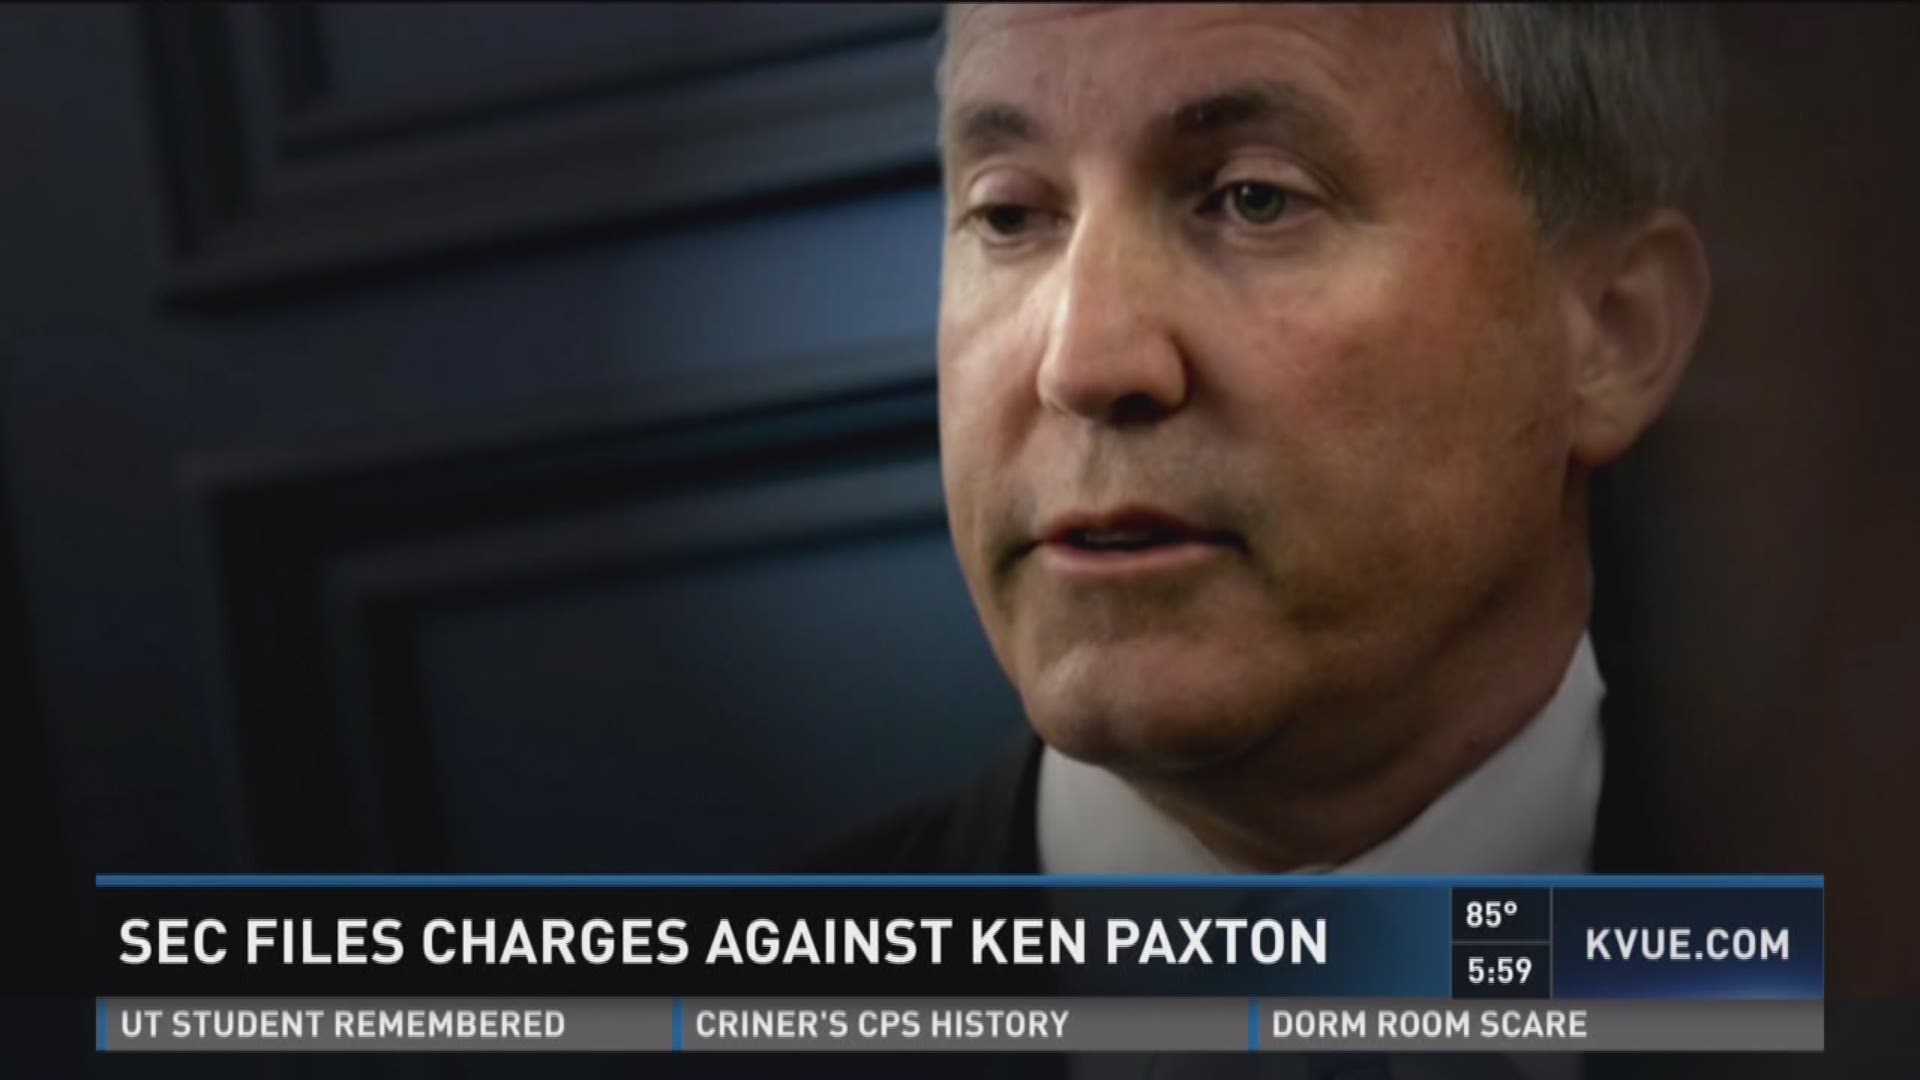 SEC files charges against Texas AG Ken Paxton